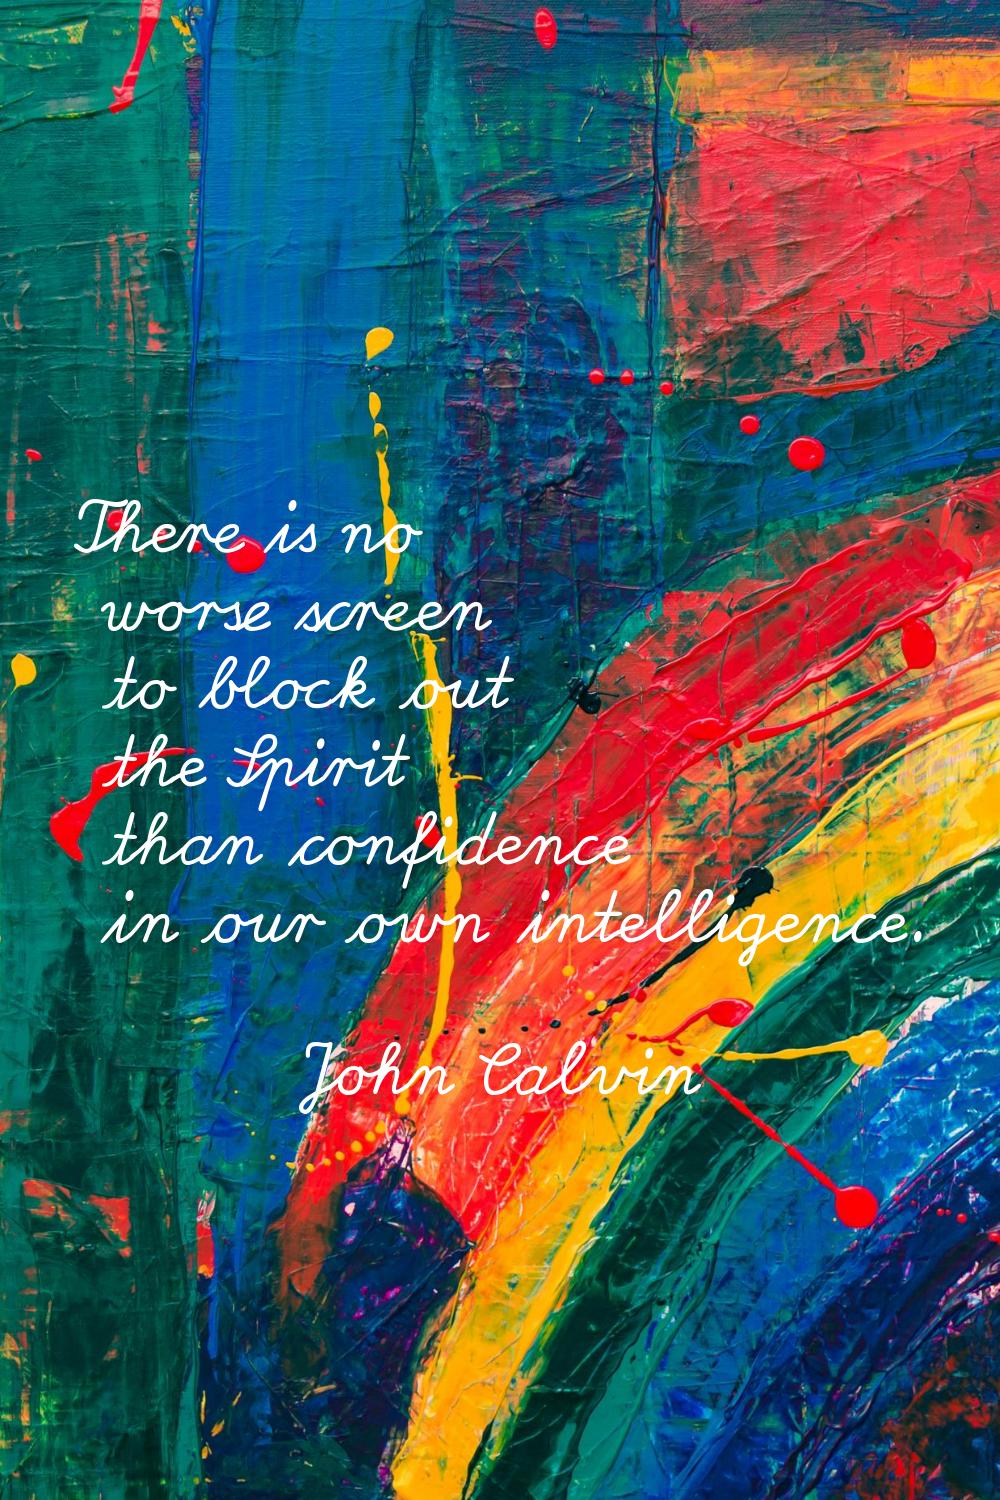 There is no worse screen to block out the Spirit than confidence in our own intelligence.